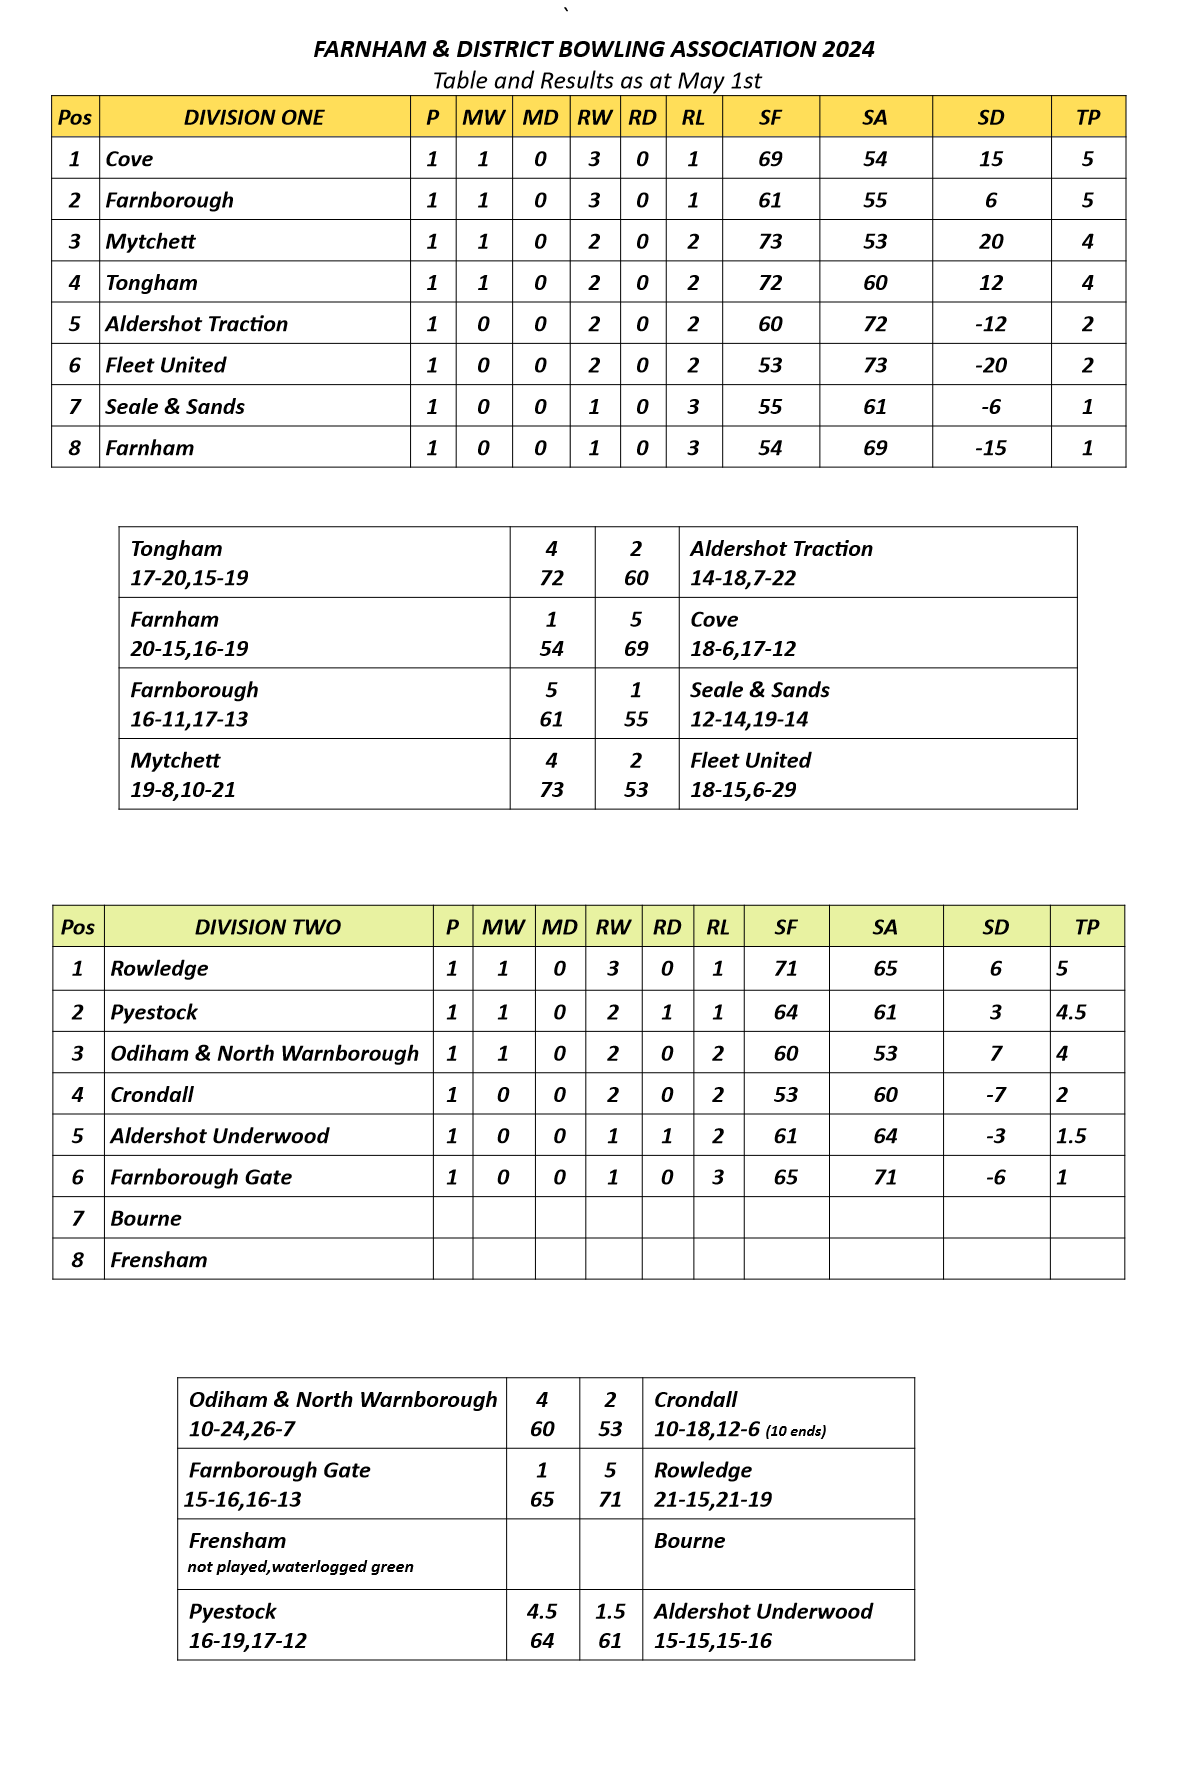  Farnham&District Bowling Association  Tables & Results as at May 1st